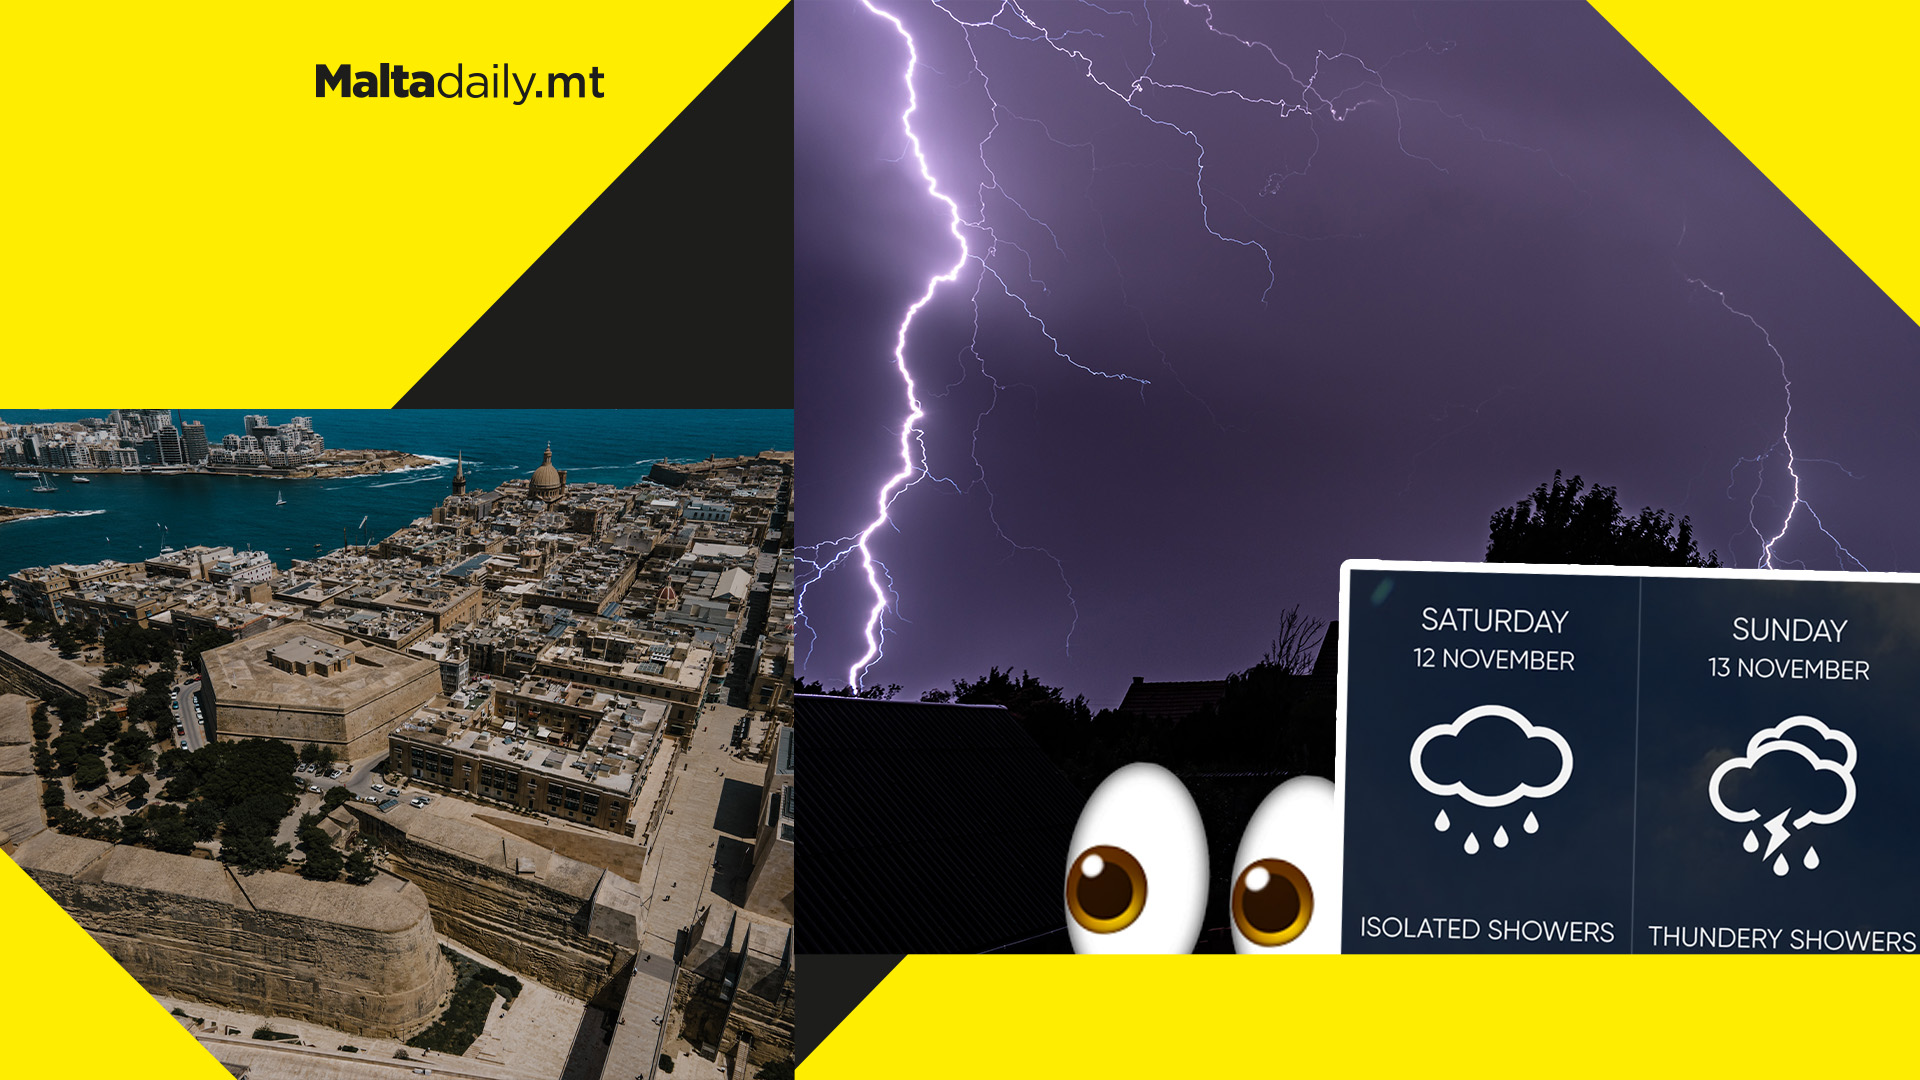 Clouds on Friday with thunder and rain showers over Malta for the rest of the weekend